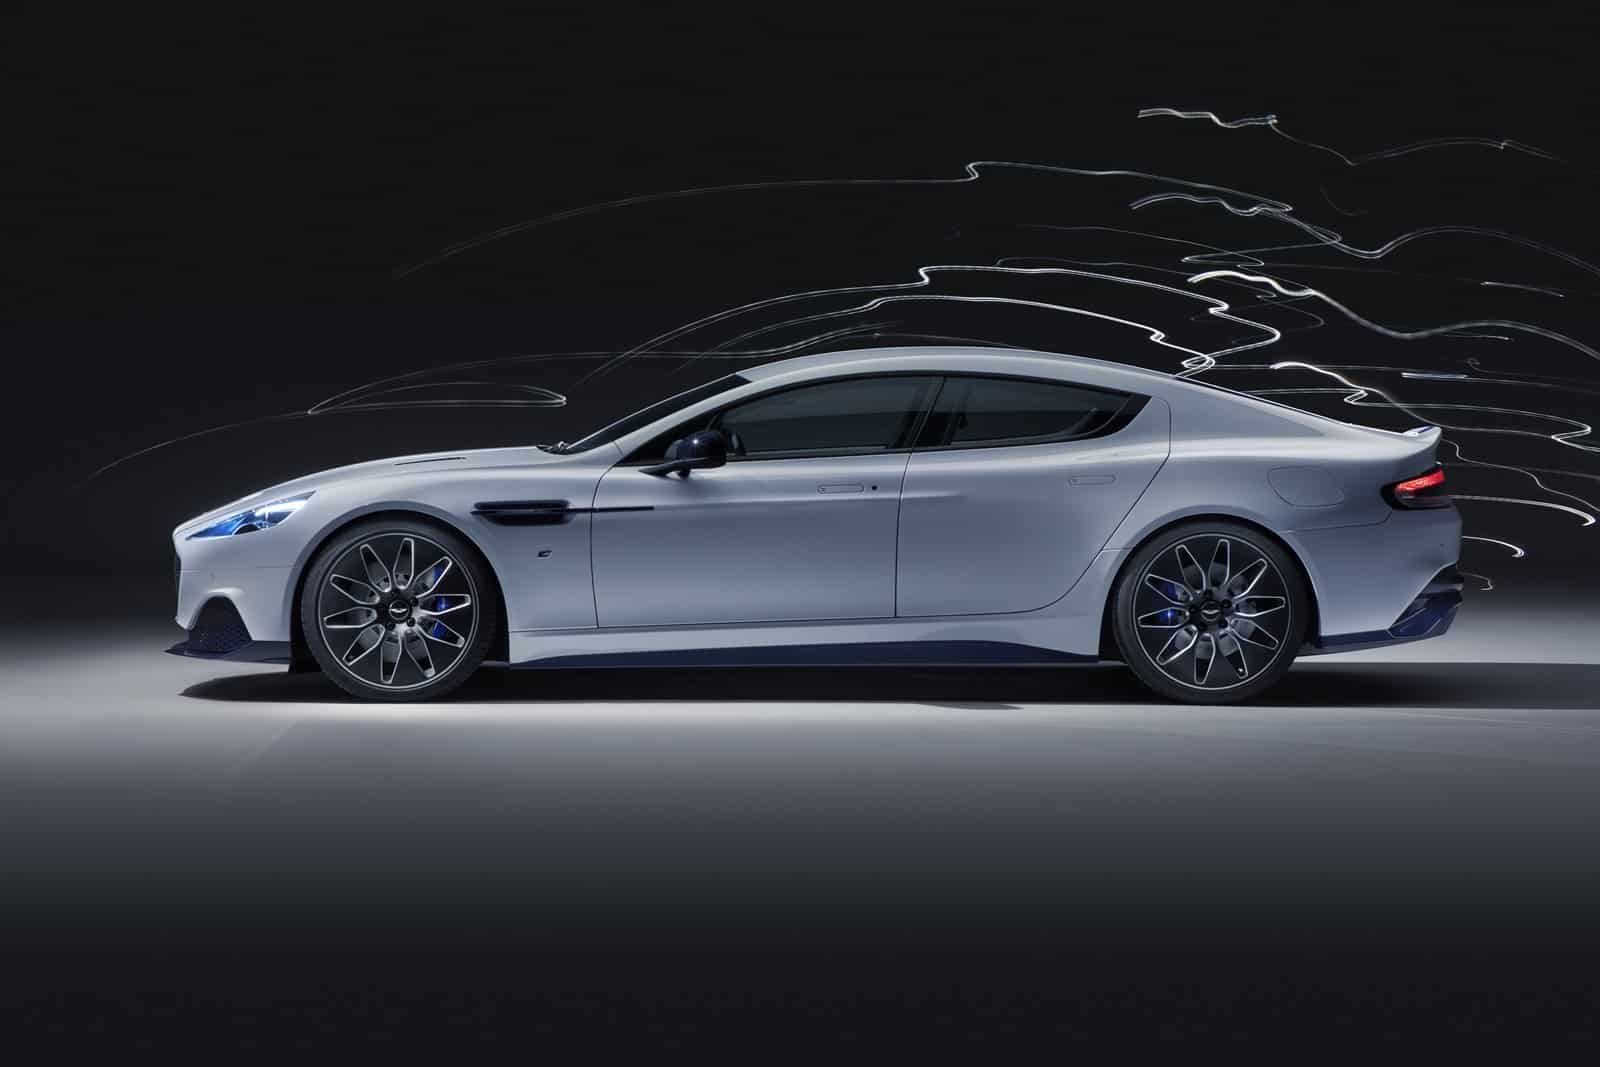 Aston Martin Says Goodbye to Pure Internal Combustion